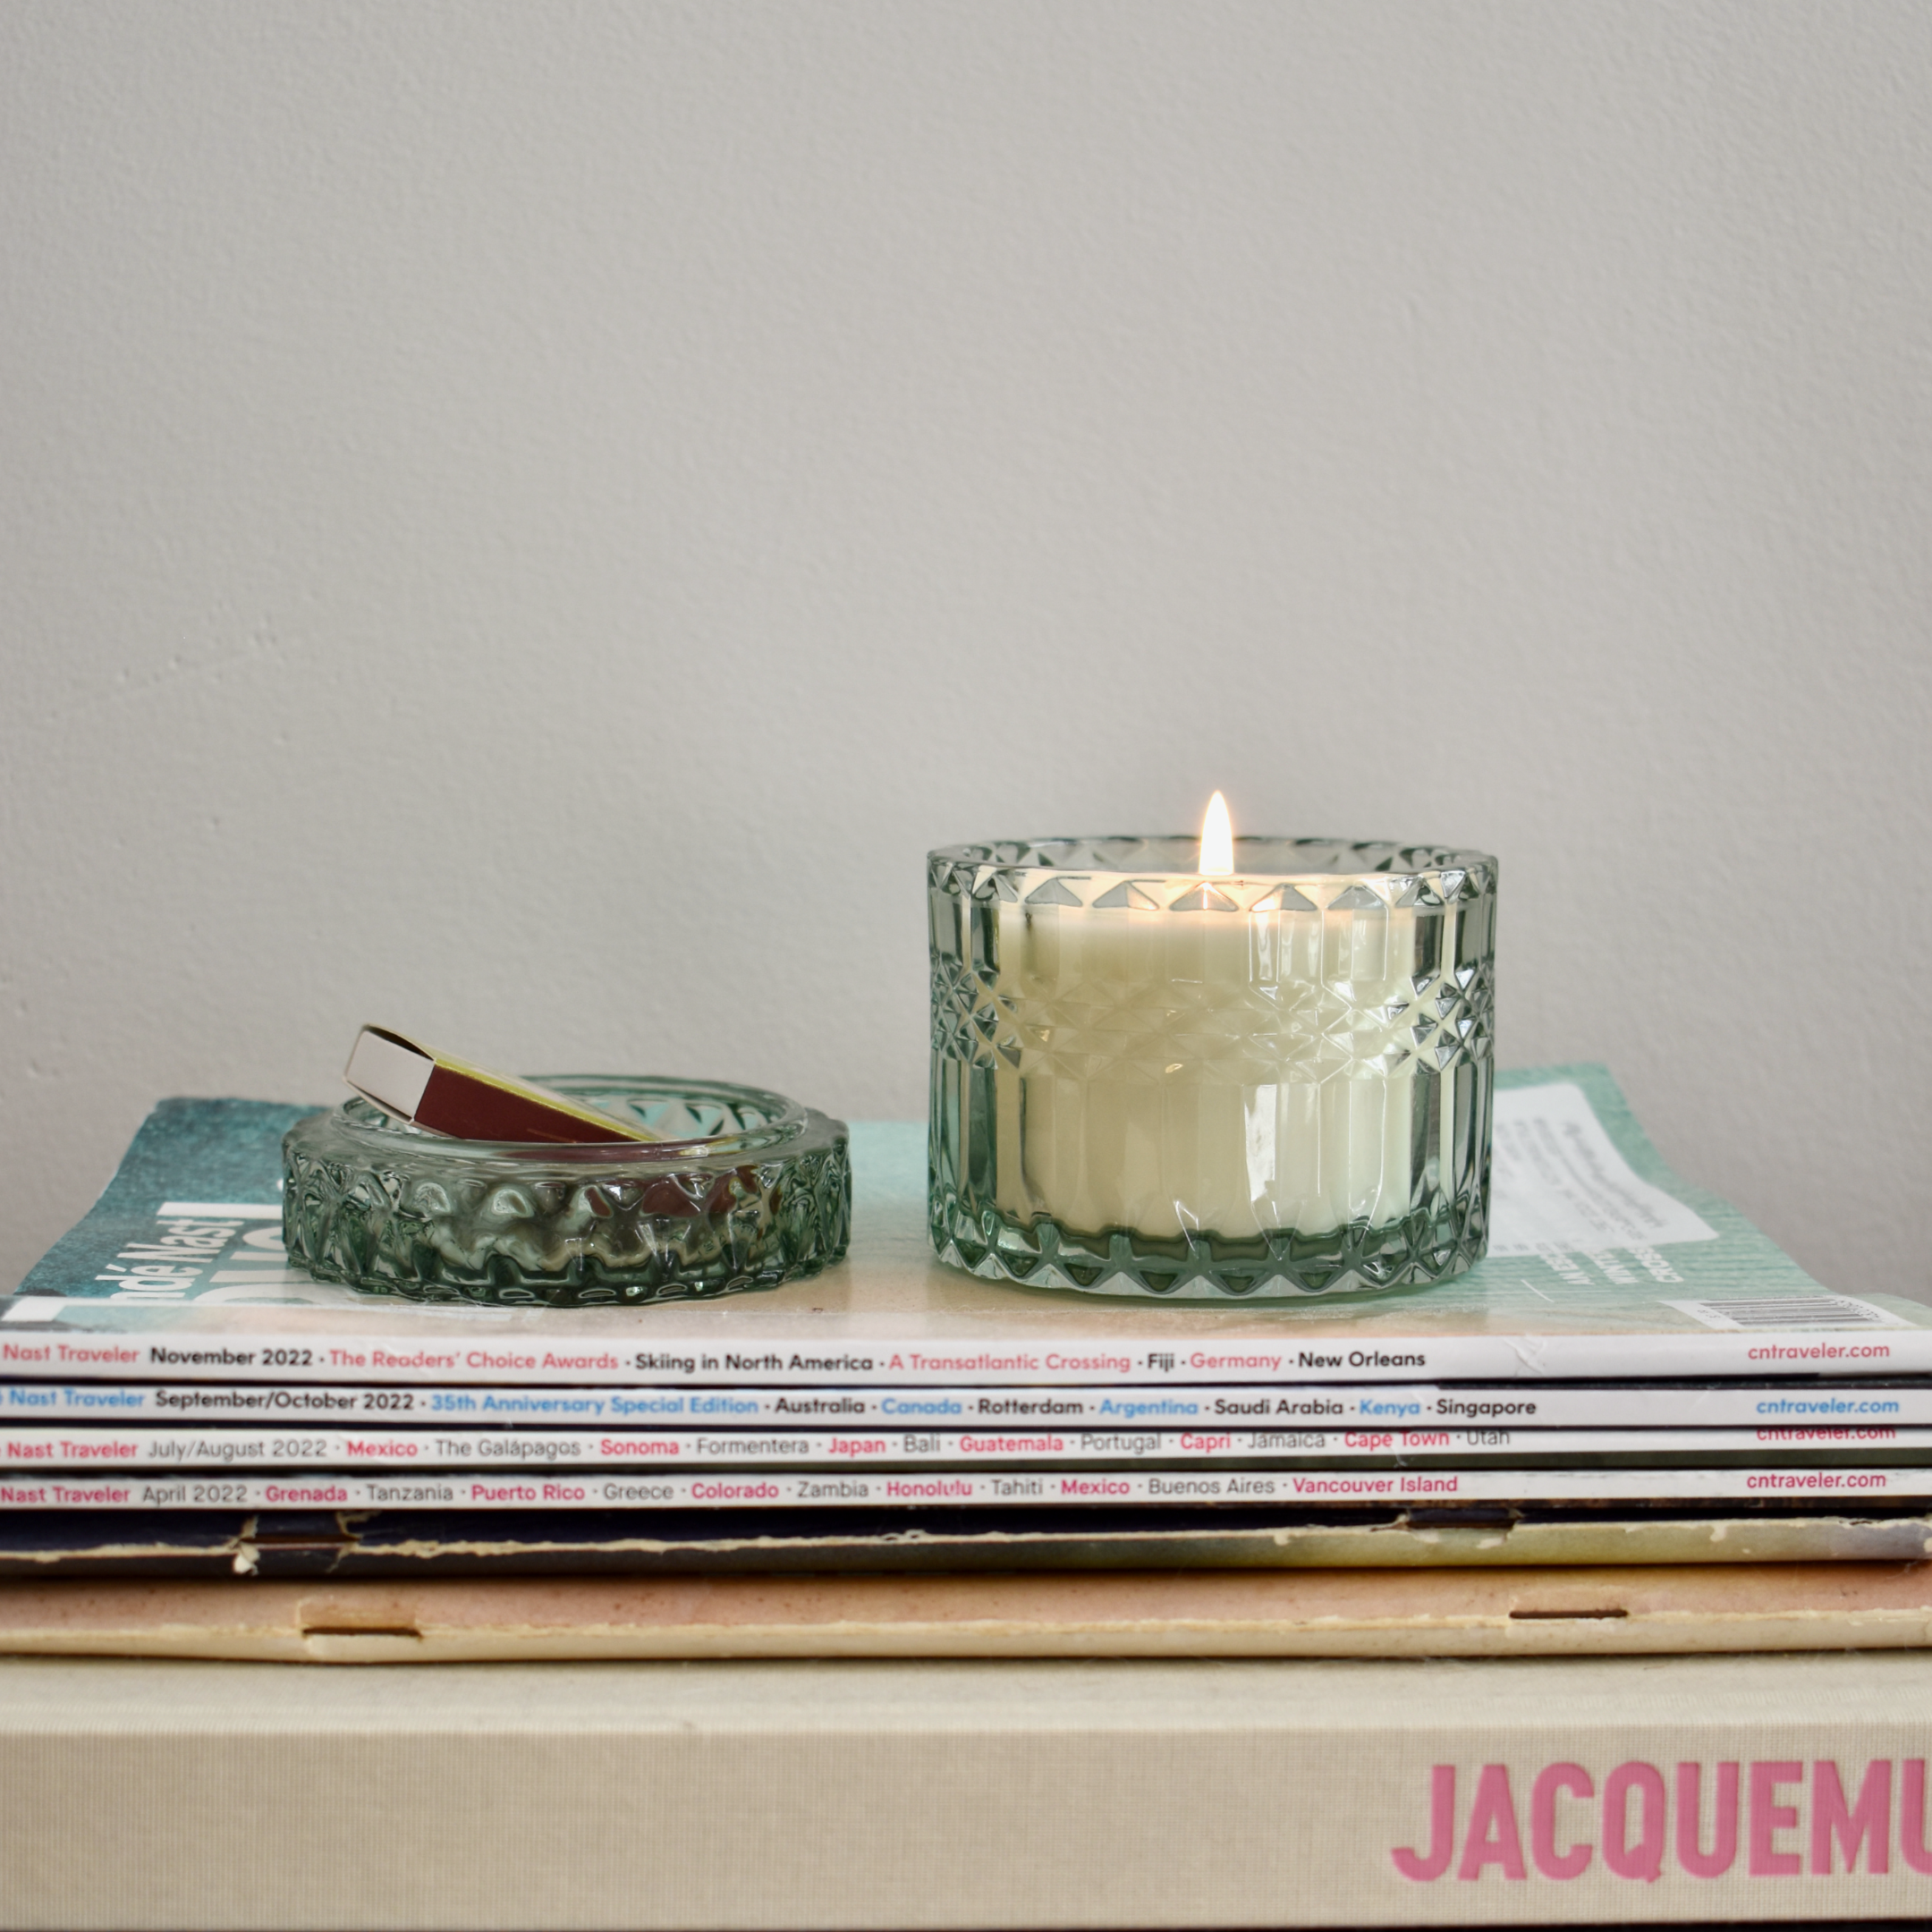 lit candle on top of coffee book stack. living room decor. mint colored antique-style vessel. holiday winter fragrance.